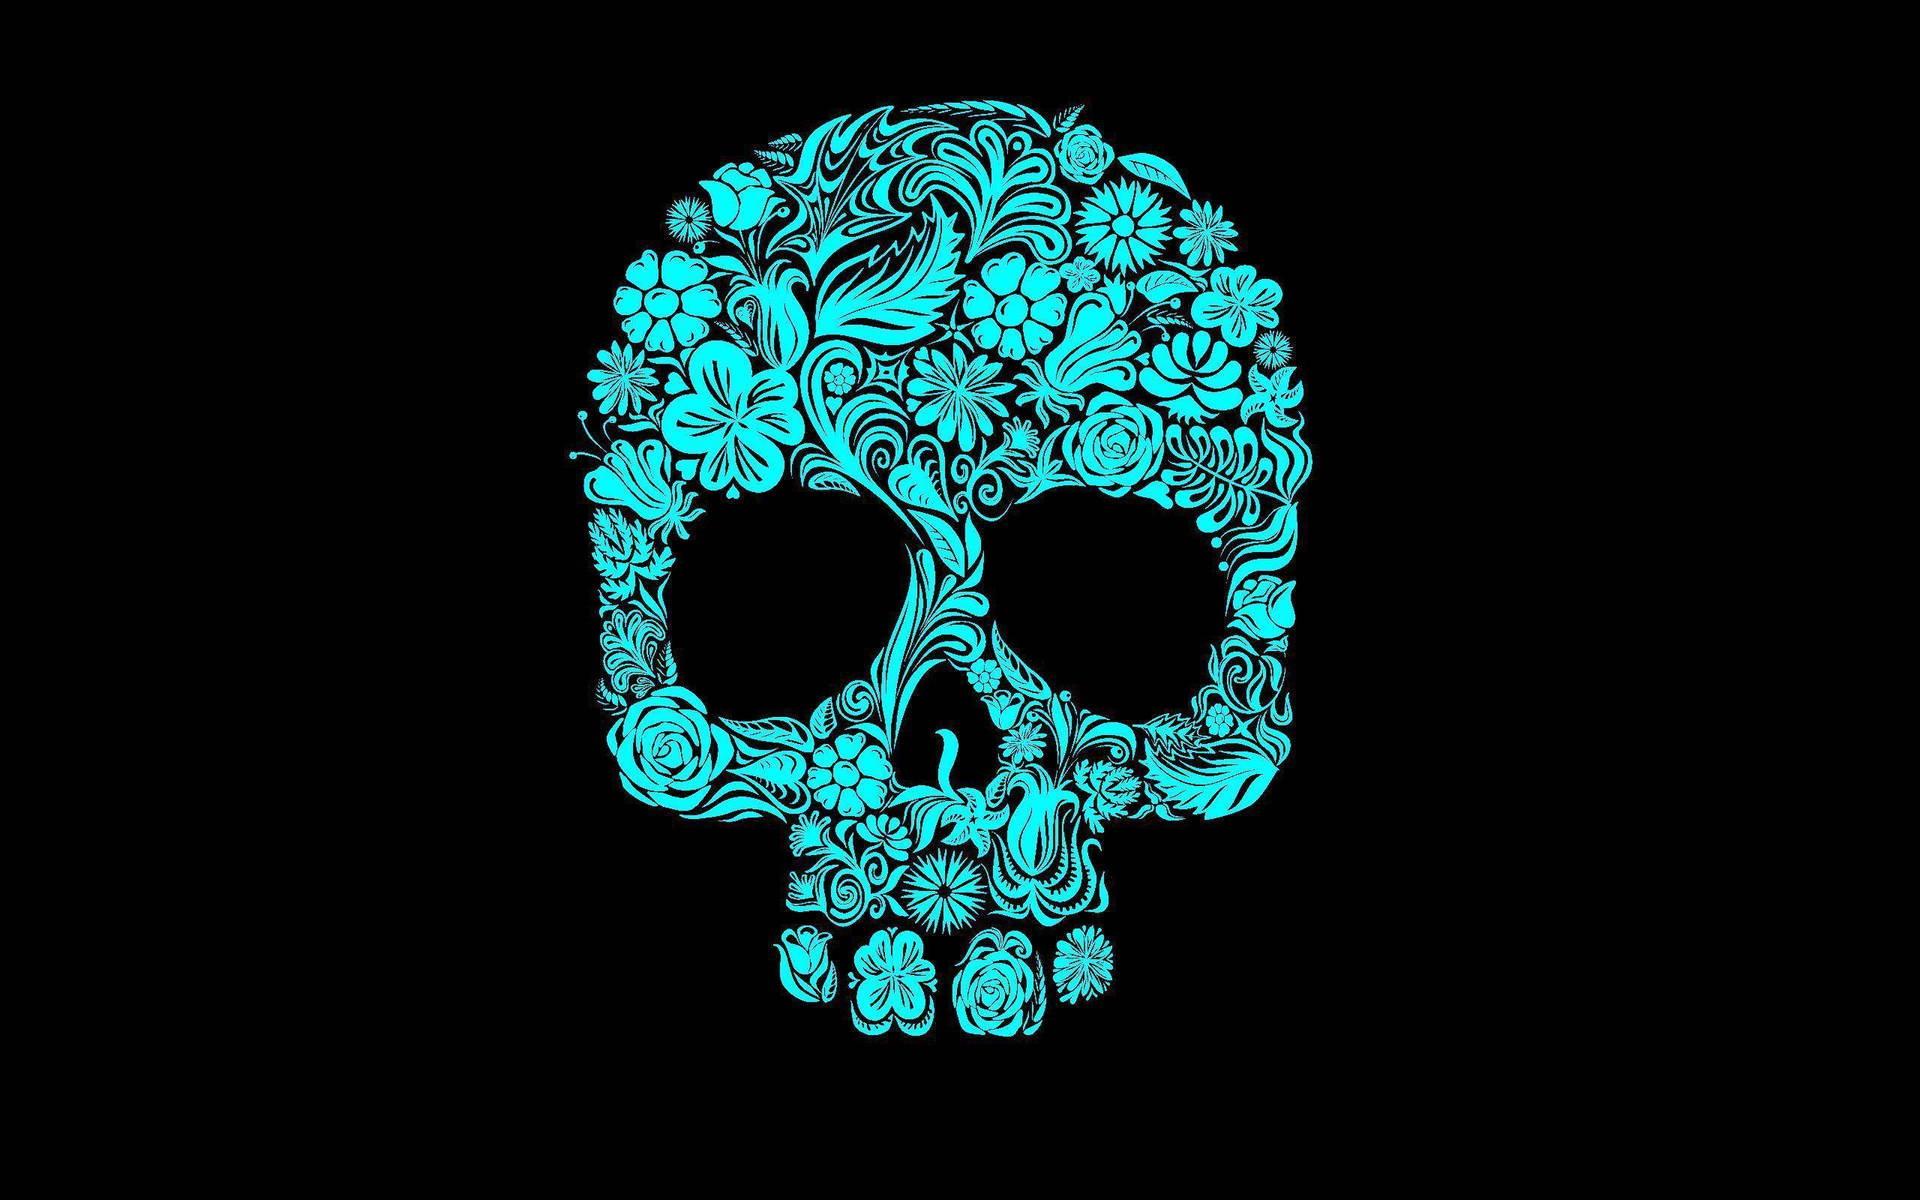 A Blue Skull With Floral Designs On A Black Background Wallpaper